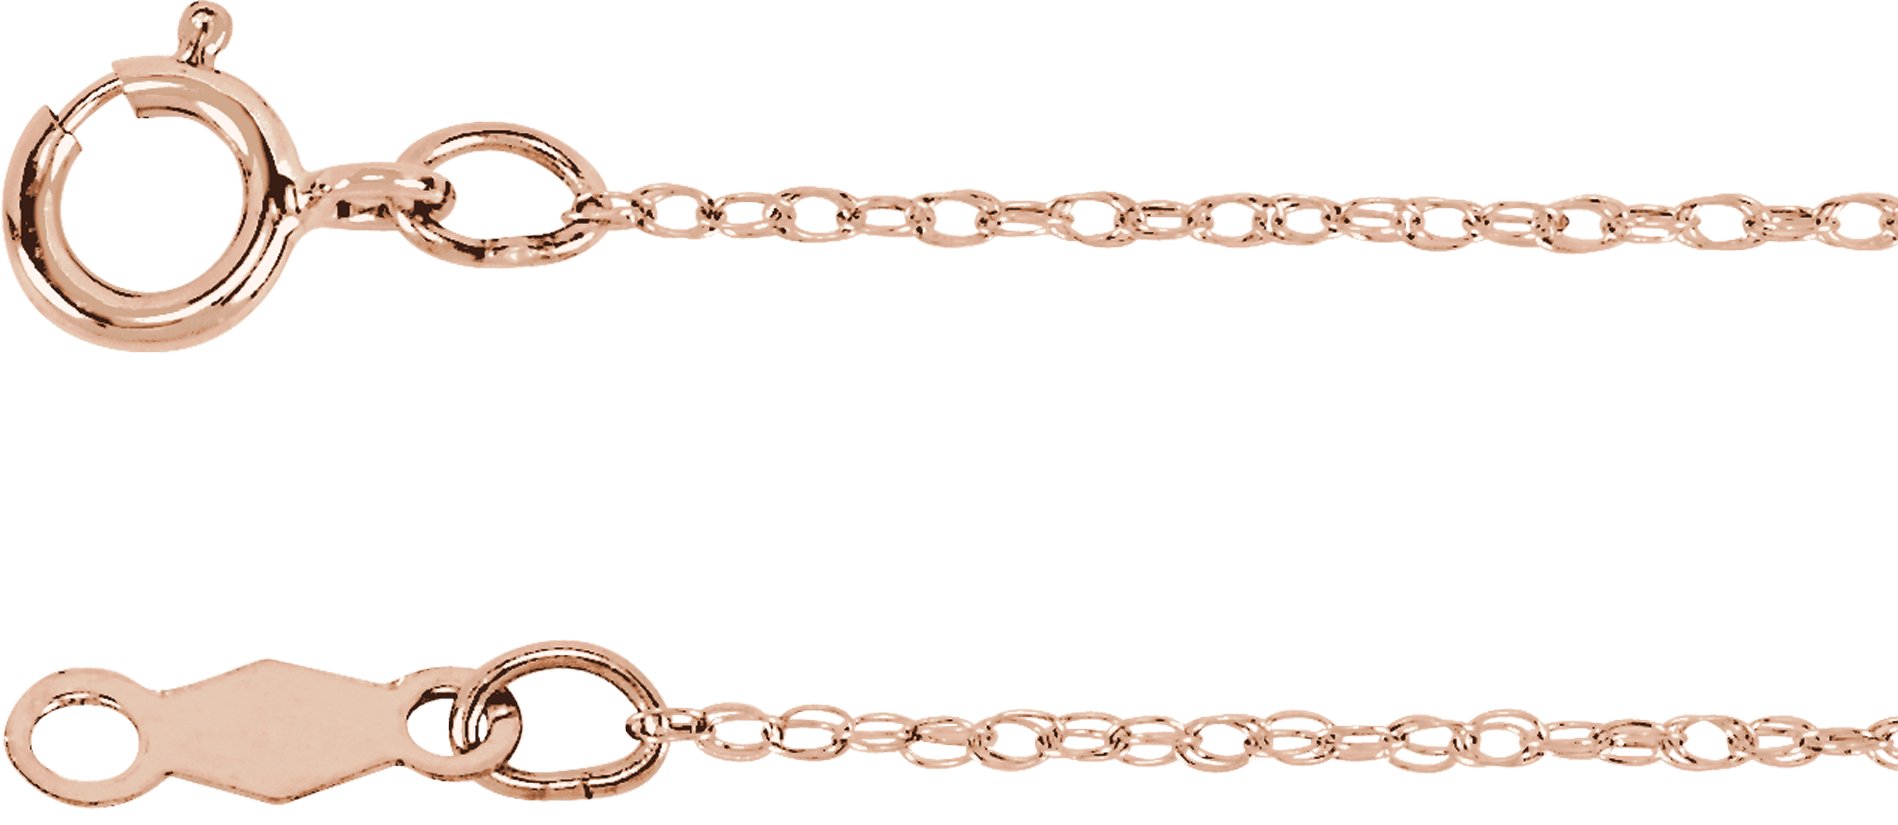 14K Rose .75 mm Rope 24" Chain 